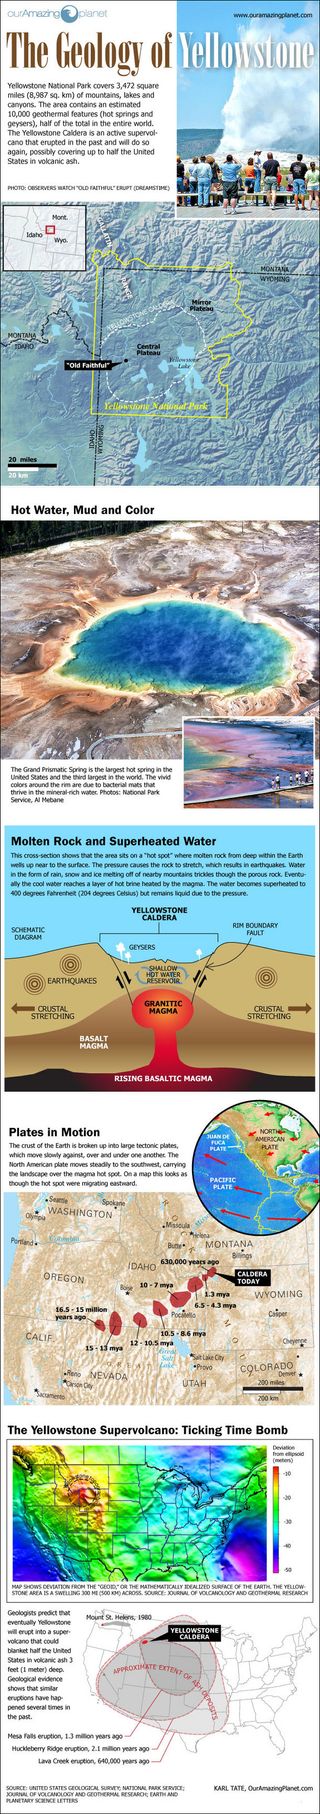 The geology of Yellowstone National Park, including the caldera that underlies it. (Click to enlarge.)